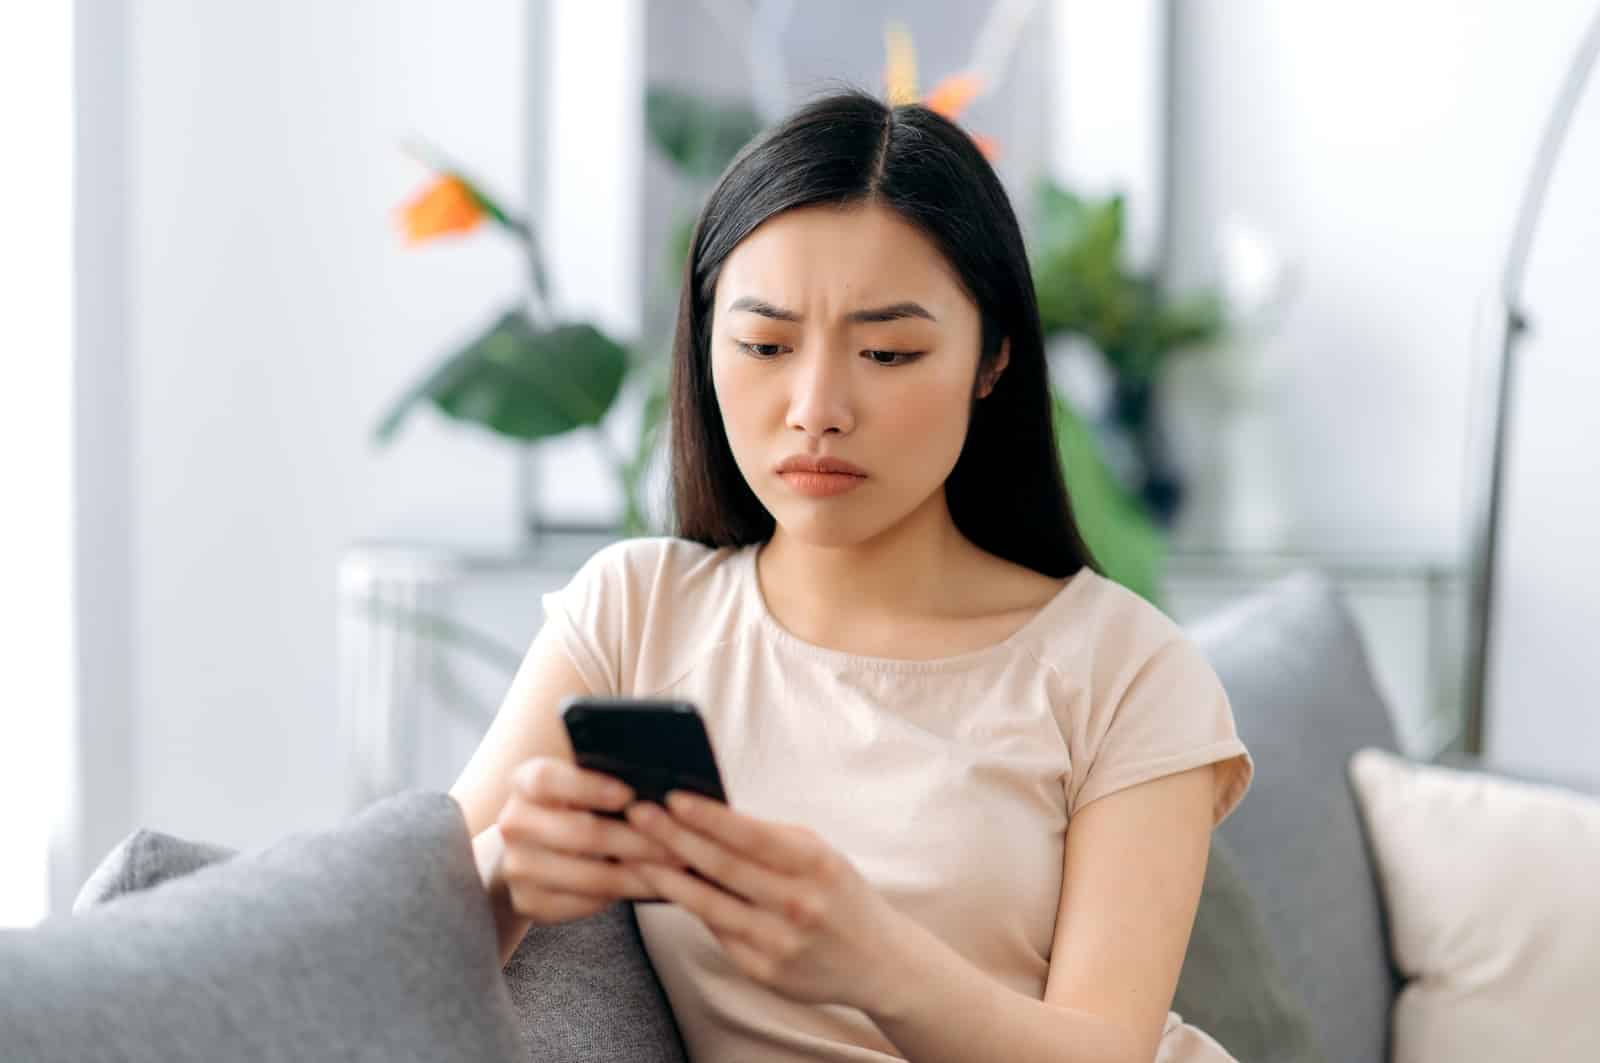 Image Credit: Shutterstock / Kateryna Onyshchuk <p>At 13, Trisha Prabhu invented ReThink, an app to combat cyberbullying by detecting harmful messages before they are sent. Her innovative approach to social issues through technology has earned her global recognition and numerous awards.</p>